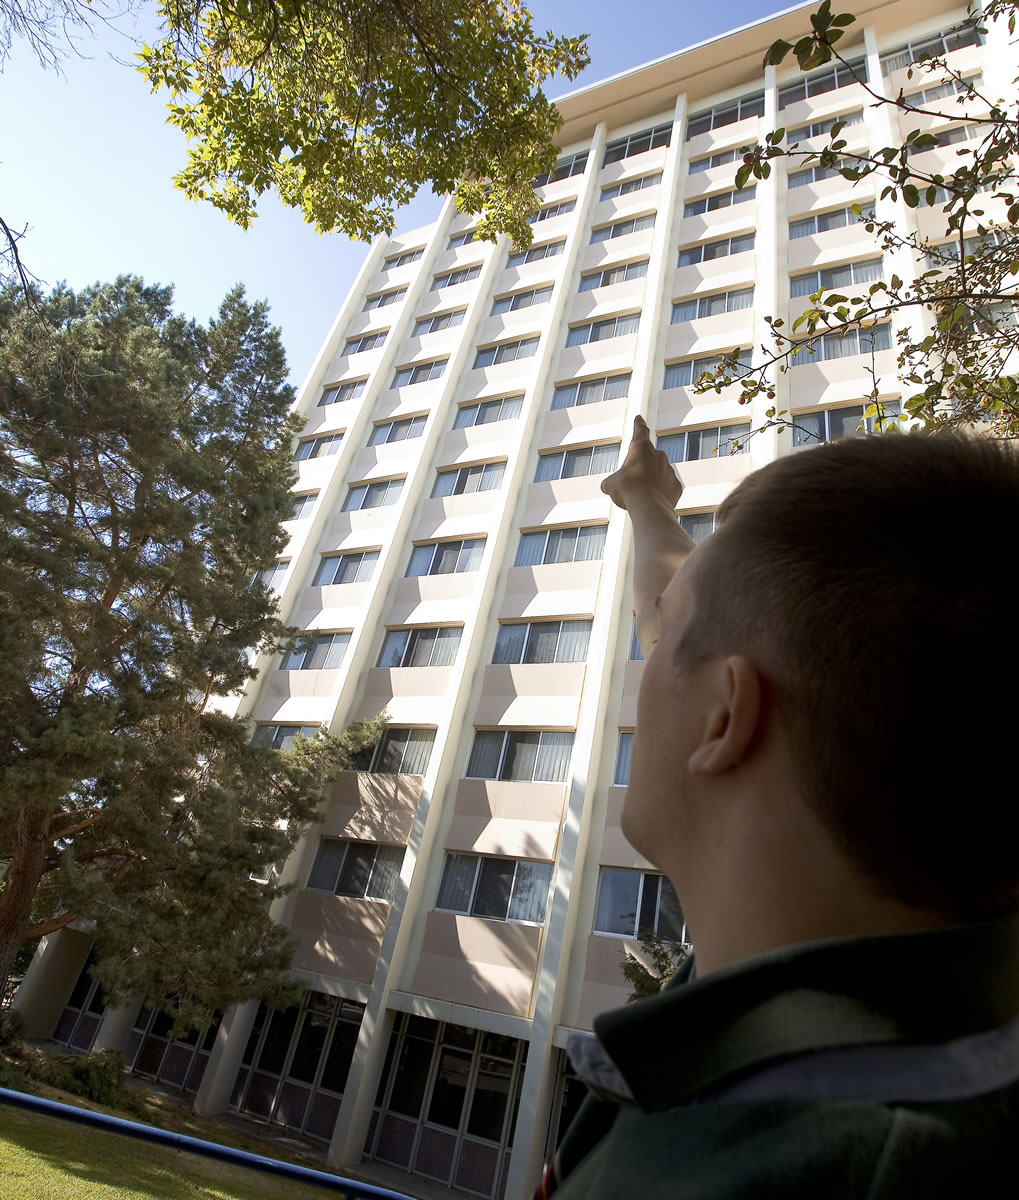 Brady Seroshek, 21, of Longview, points to the window Thursday near the top of Orton Hall in Pullman, where a fellow Washington State University student fell Wednesday from an 11th-floor dormitory room and survived.